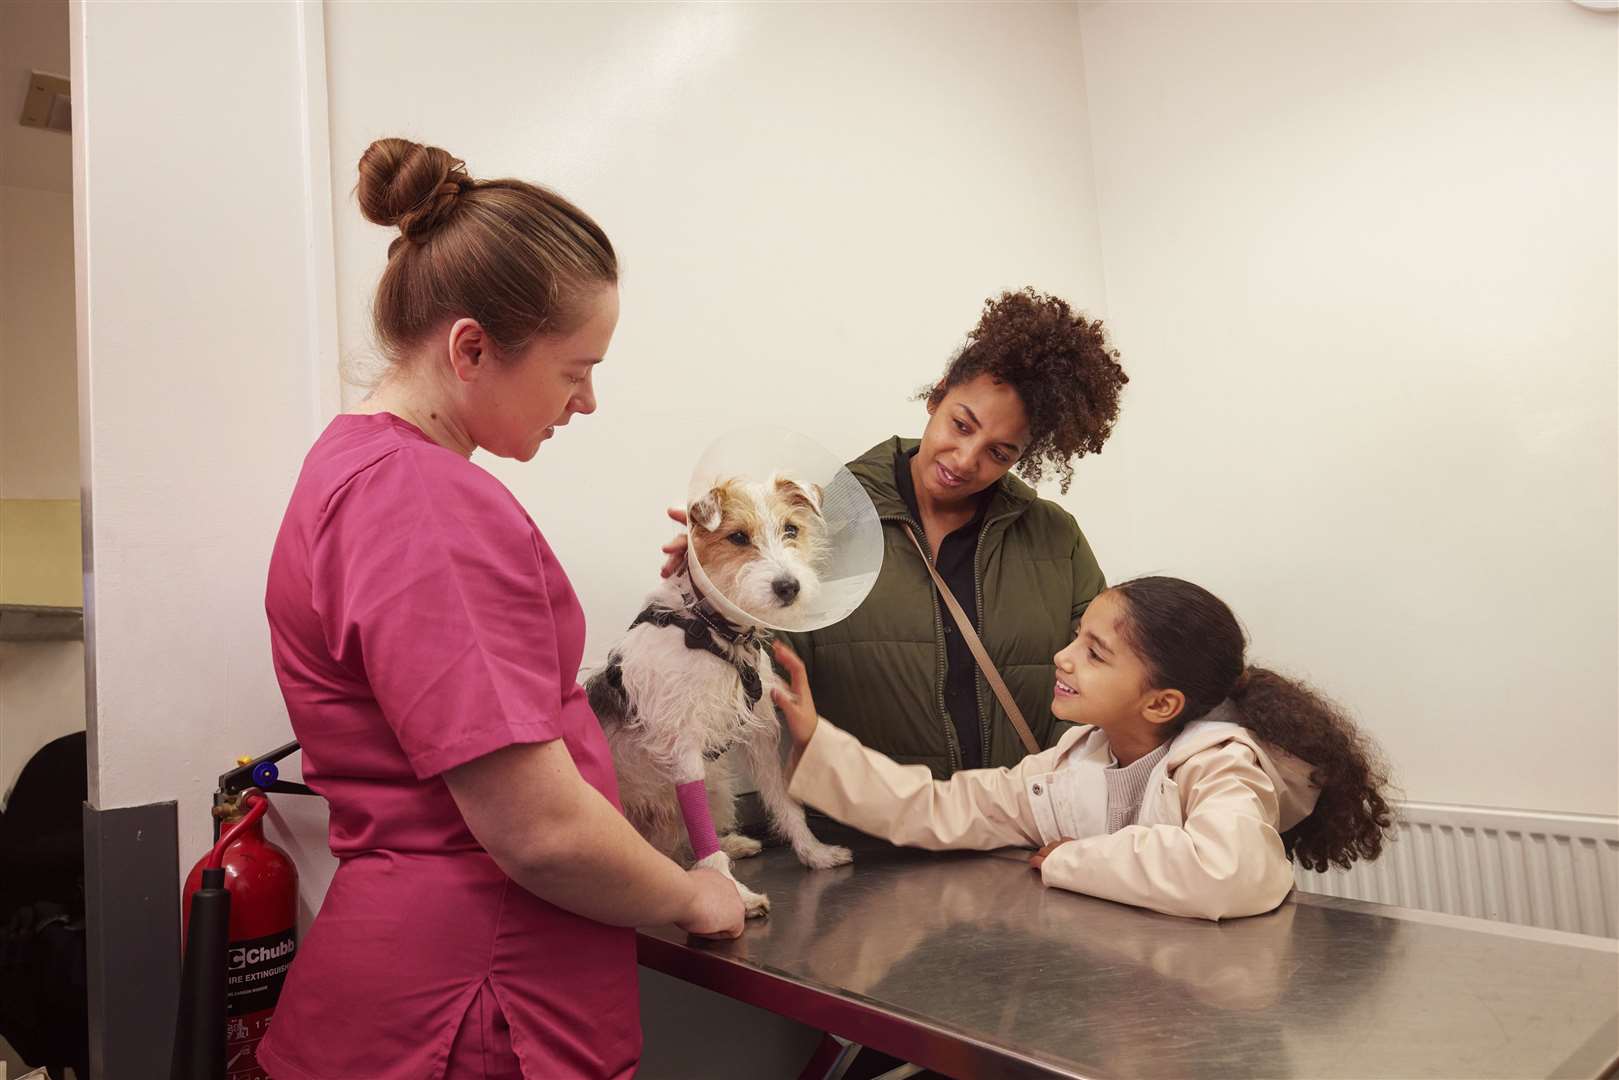 The PDSA treated almost 400,000 animals last year.